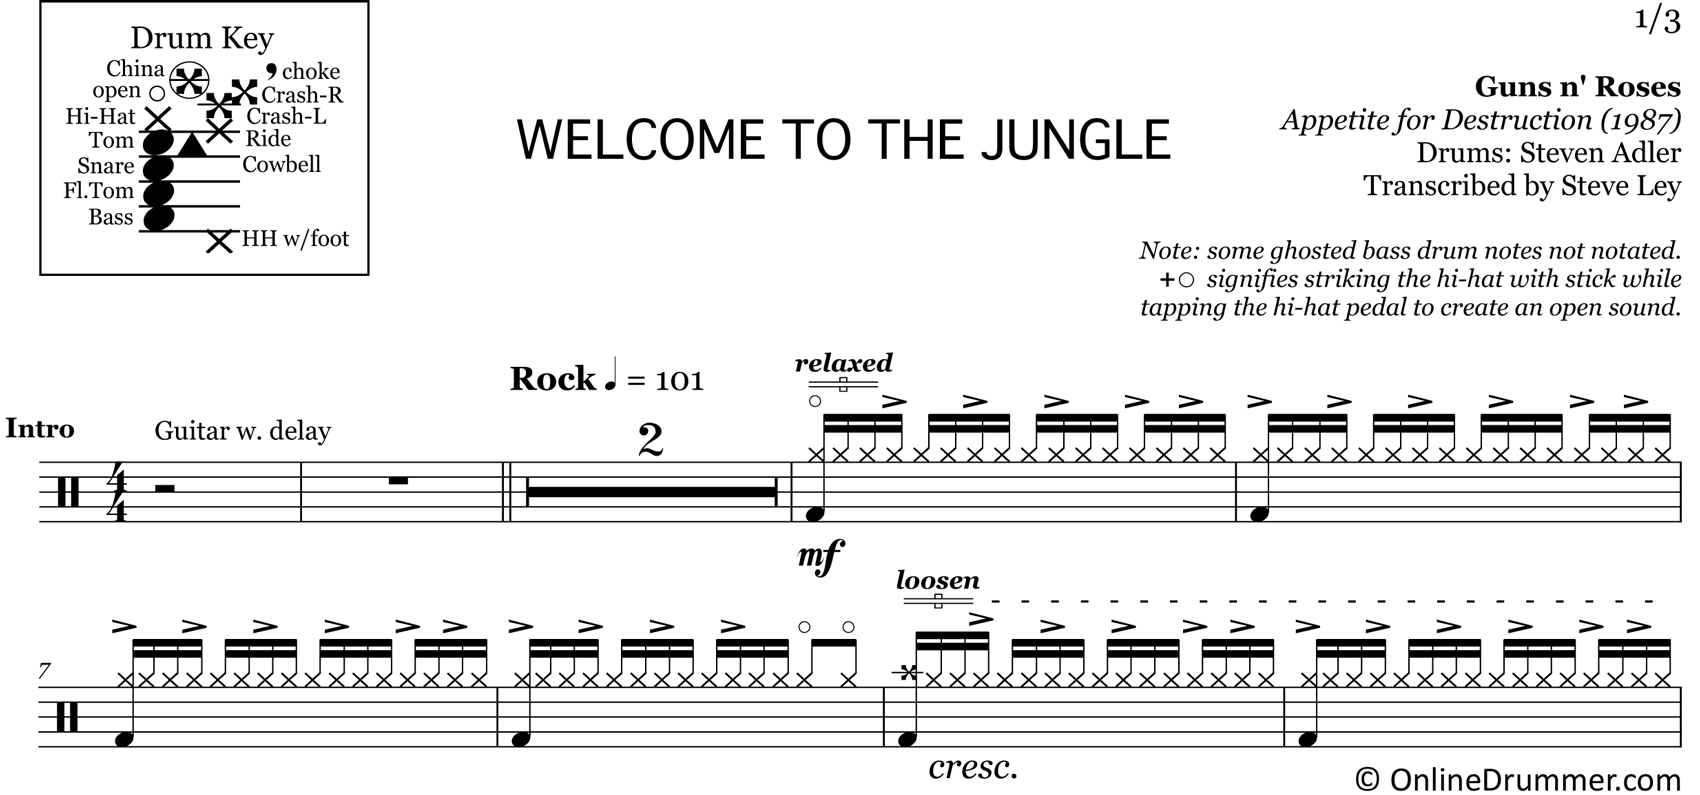 Welcome to the Jungle - Guns N Roses - Drum Sheet Music